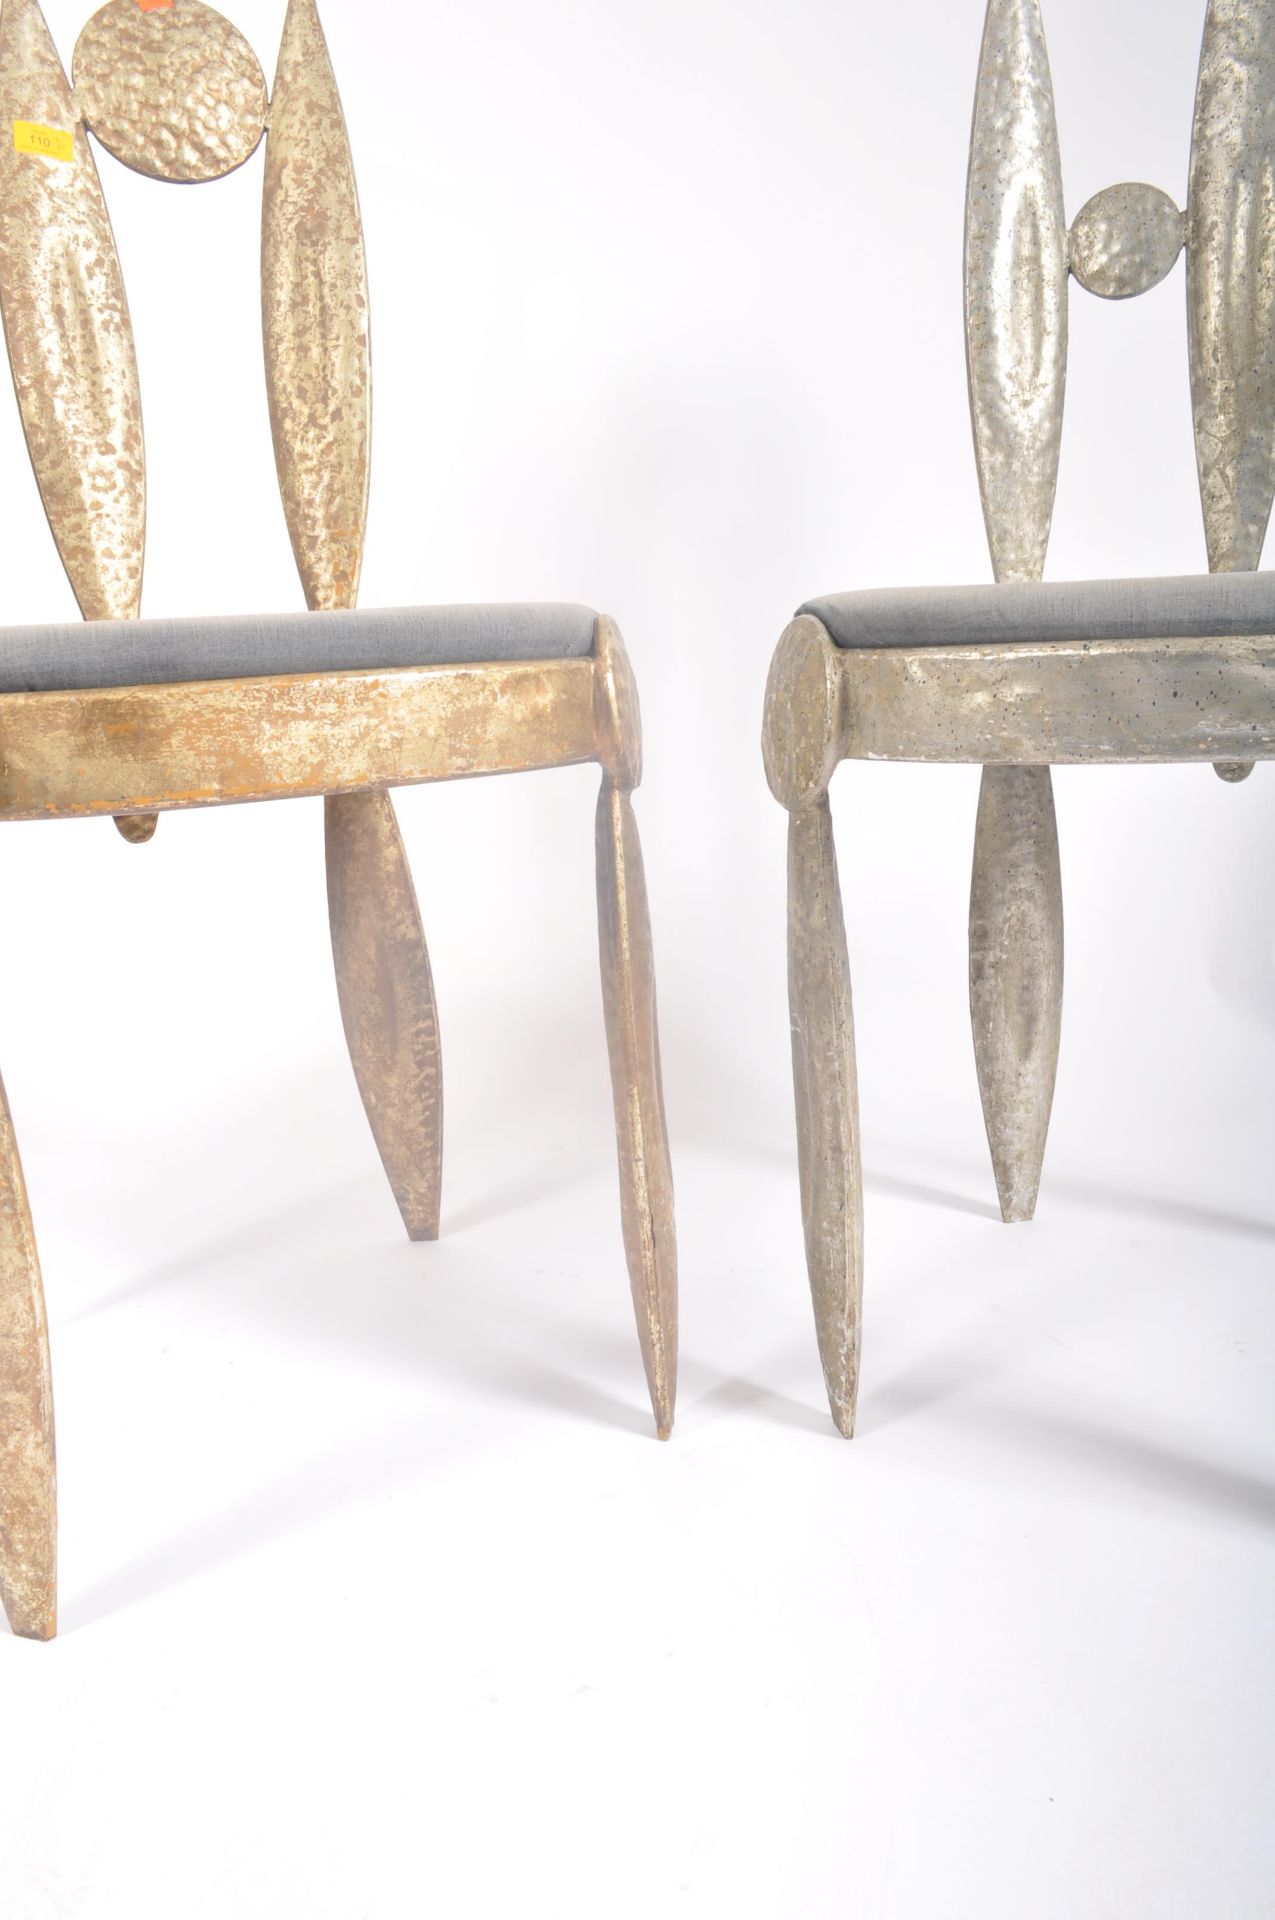 PAIR OF VINTAGE 1990S FRENCH NICOLAS BLANDIN IRON THRONE CHAIRS - Image 4 of 5